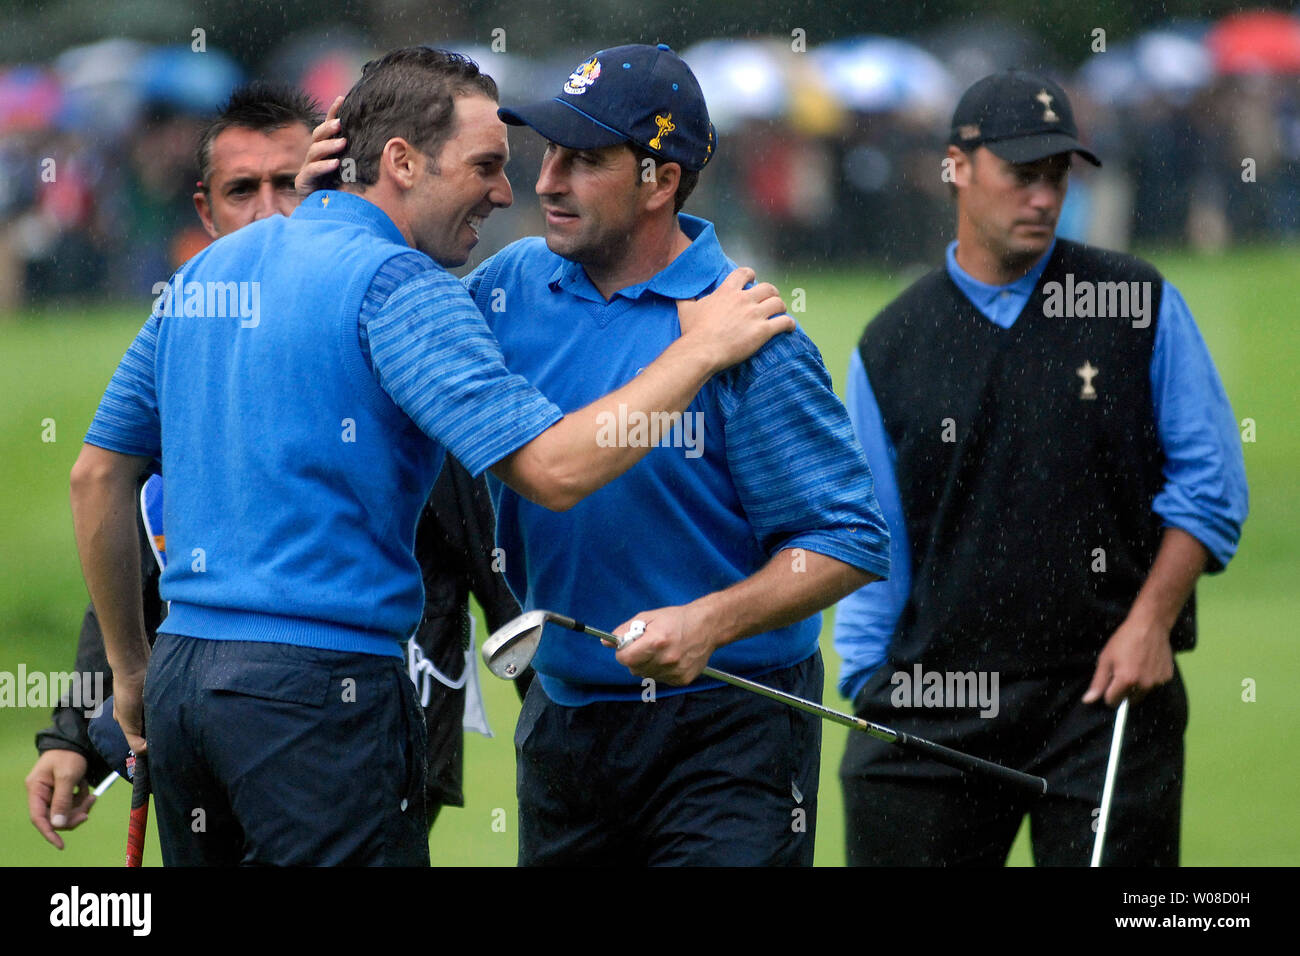 European team member Sergio Garcia (L) and Jos Maria Olaz‡bal celebrate after defeating Phil Mickelson and Chris Dimarco, during the second day of the Ryder Cup tournament at The K Club in Straffan, Ireland on September 23, 2006. The Americans succeeded to the Europeans after Garcia won the 16th hole. (UPI Photo/Kevin Dietsch) Stock Photo